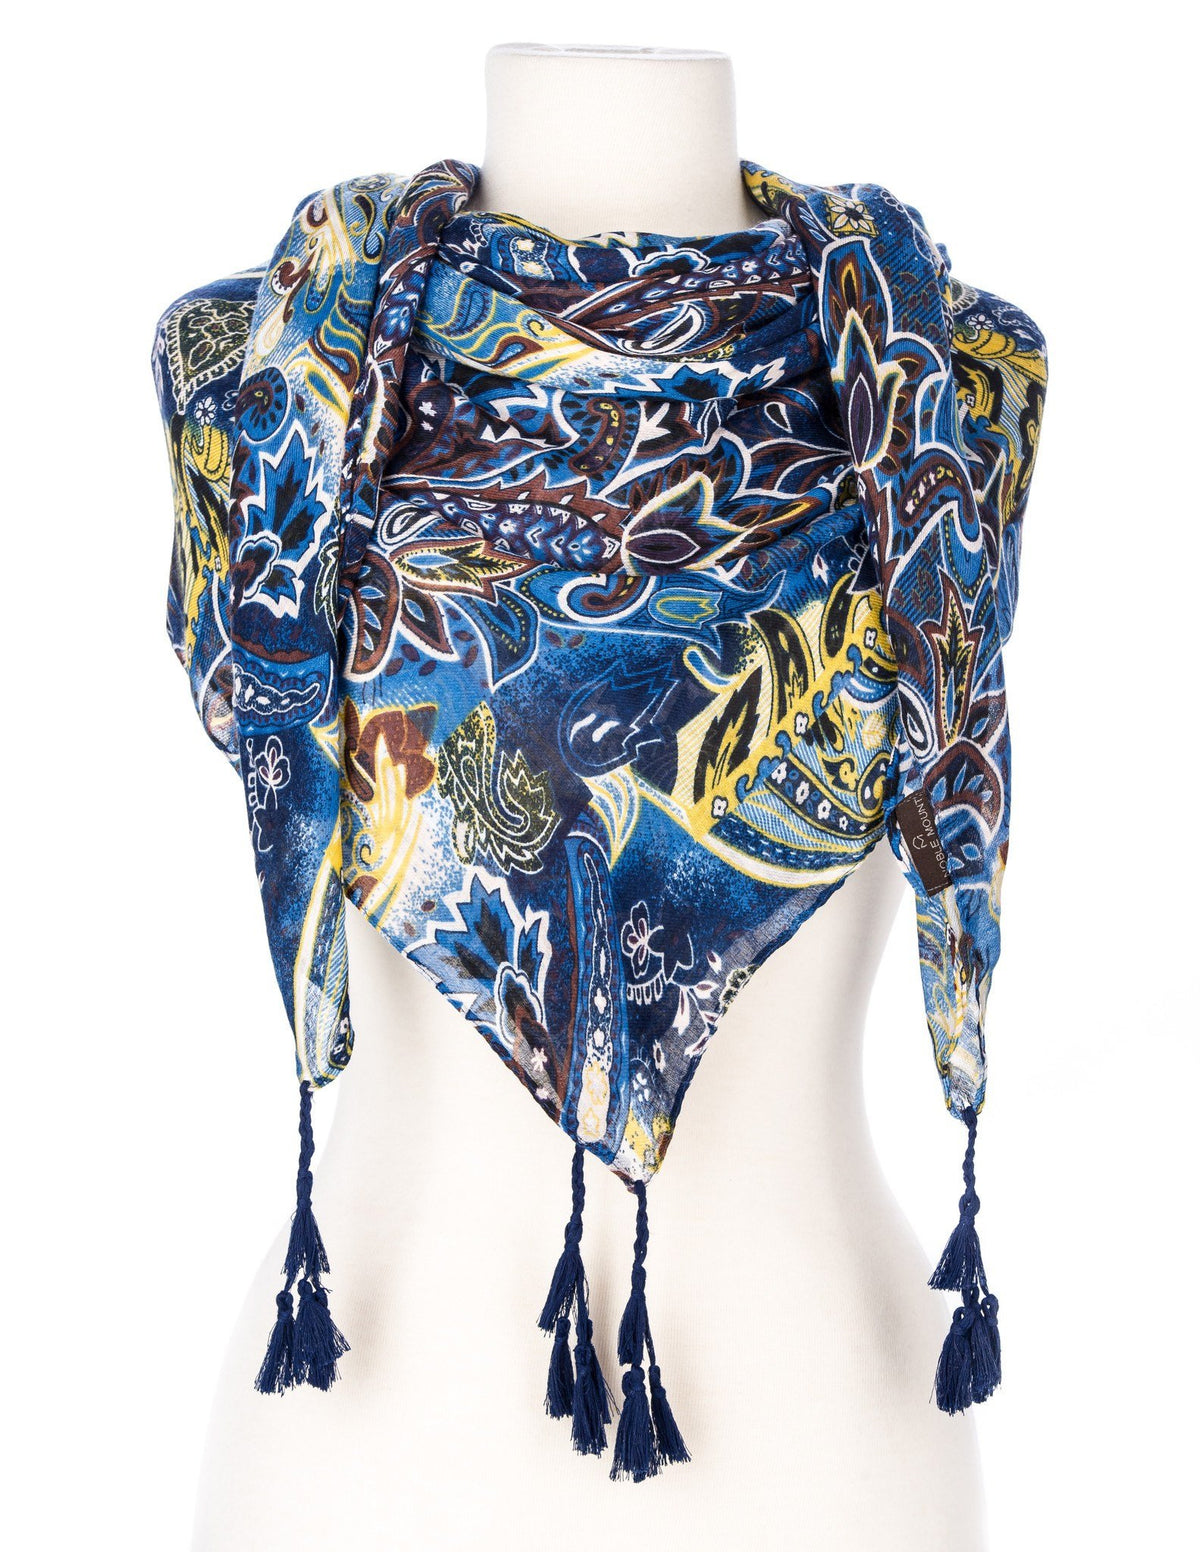 Peacock Flair Spring Scarf - Blue/Yellow/Brown